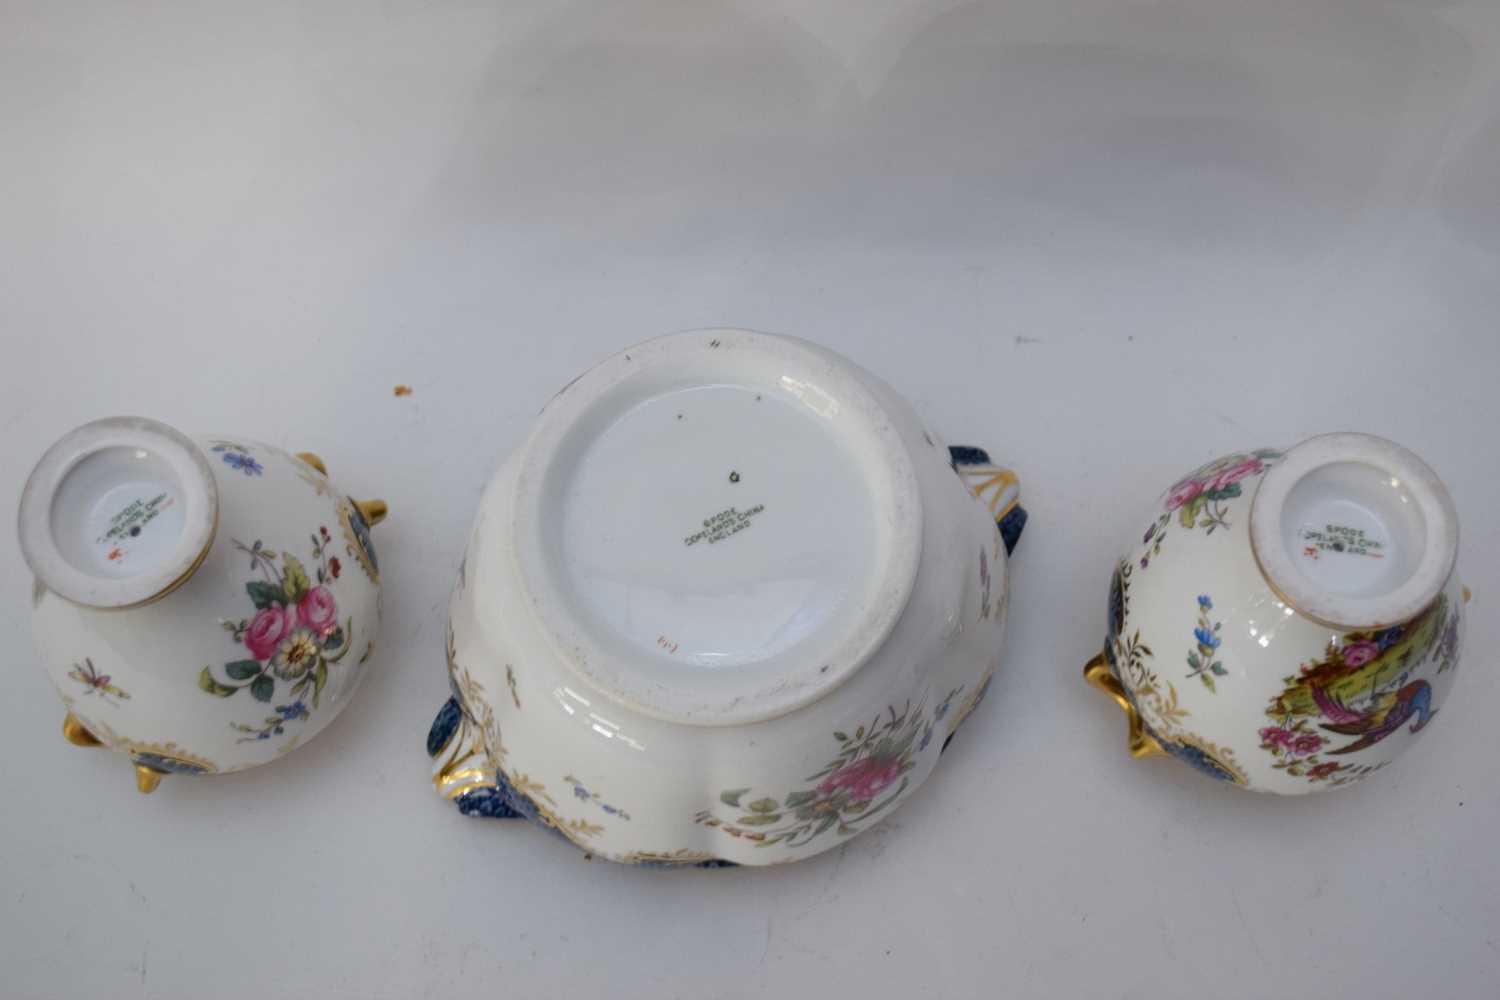 Pair of Spode Copeland vases with exotic birds together with a small matching jardiniere with floral - Image 2 of 6